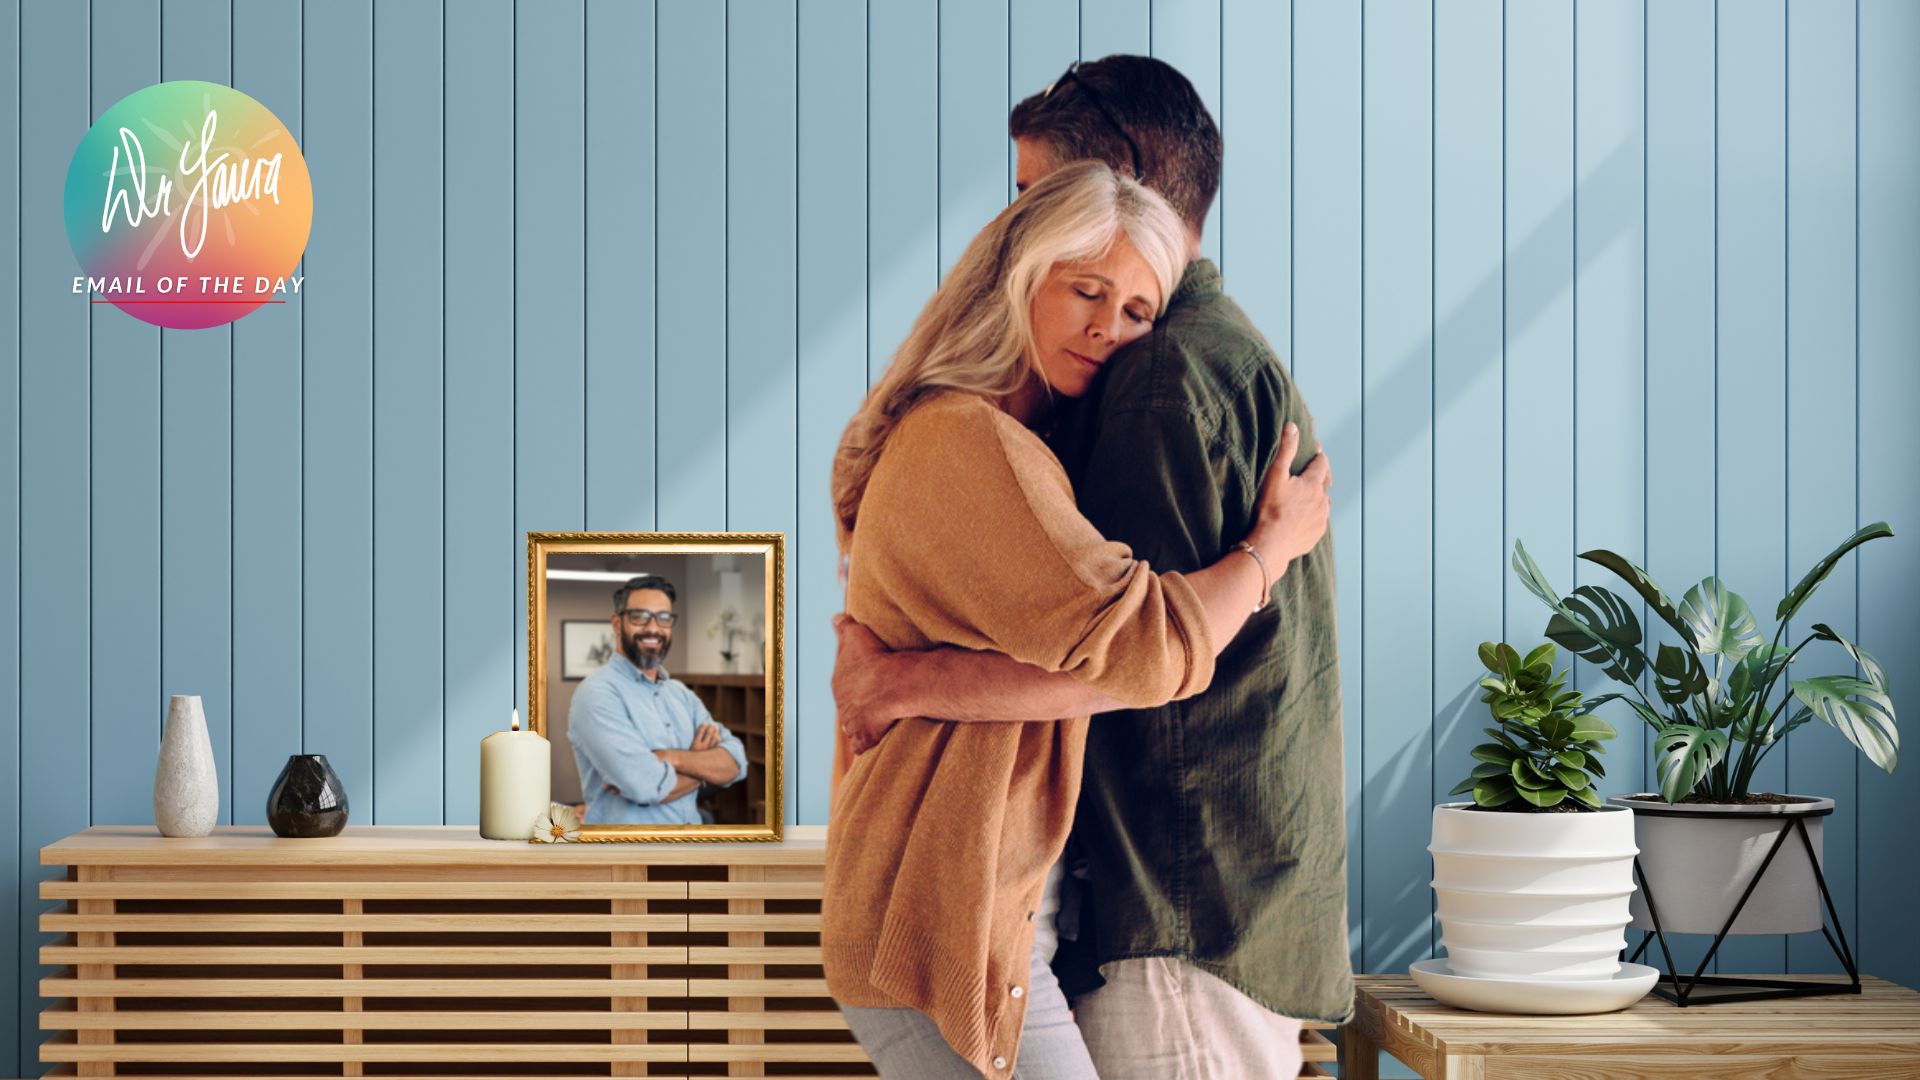 Woman embraces man while framed image of man sits on console center